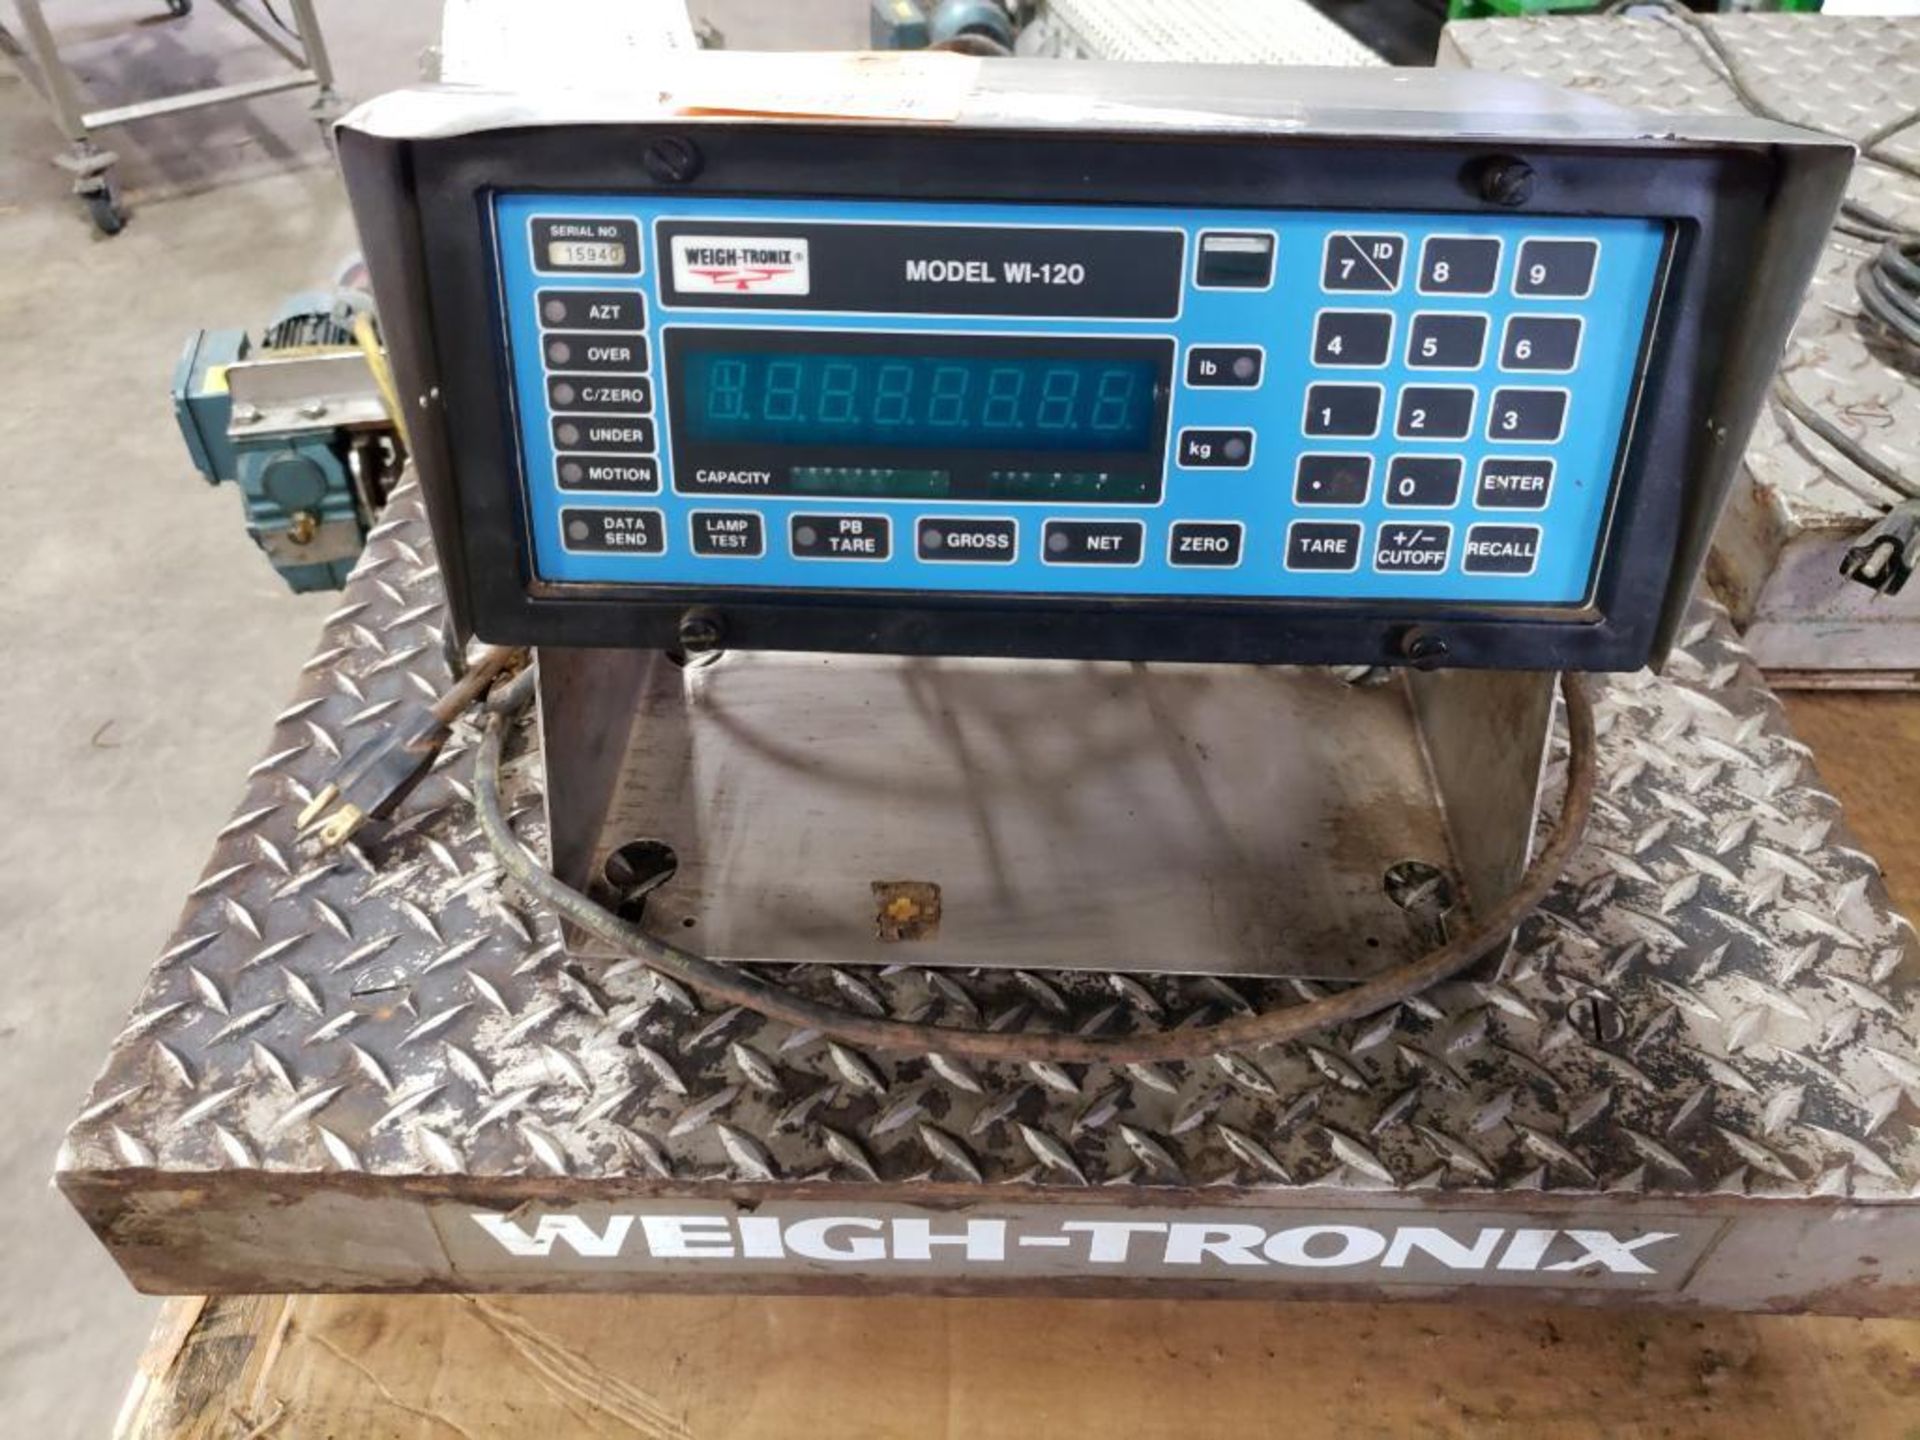 Weightronix small platform scale. 115v single phase.